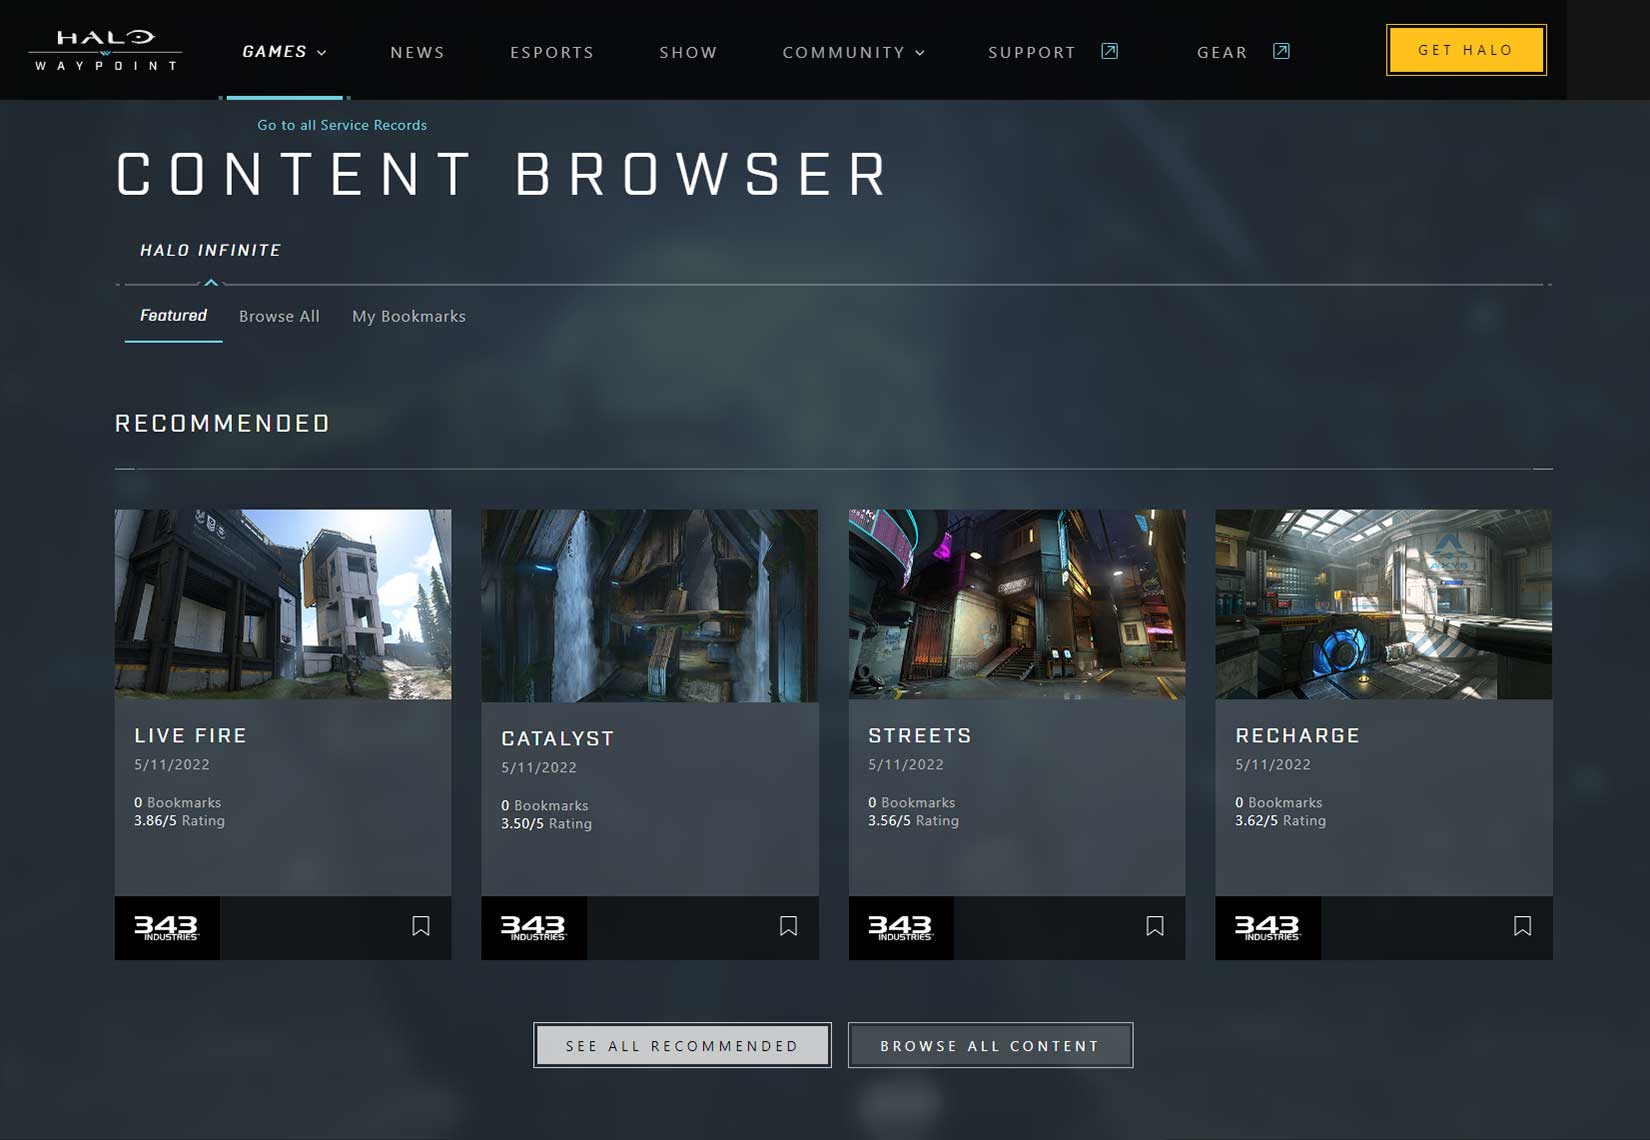 Halo Waypoint Content Browser for Halo Infinite